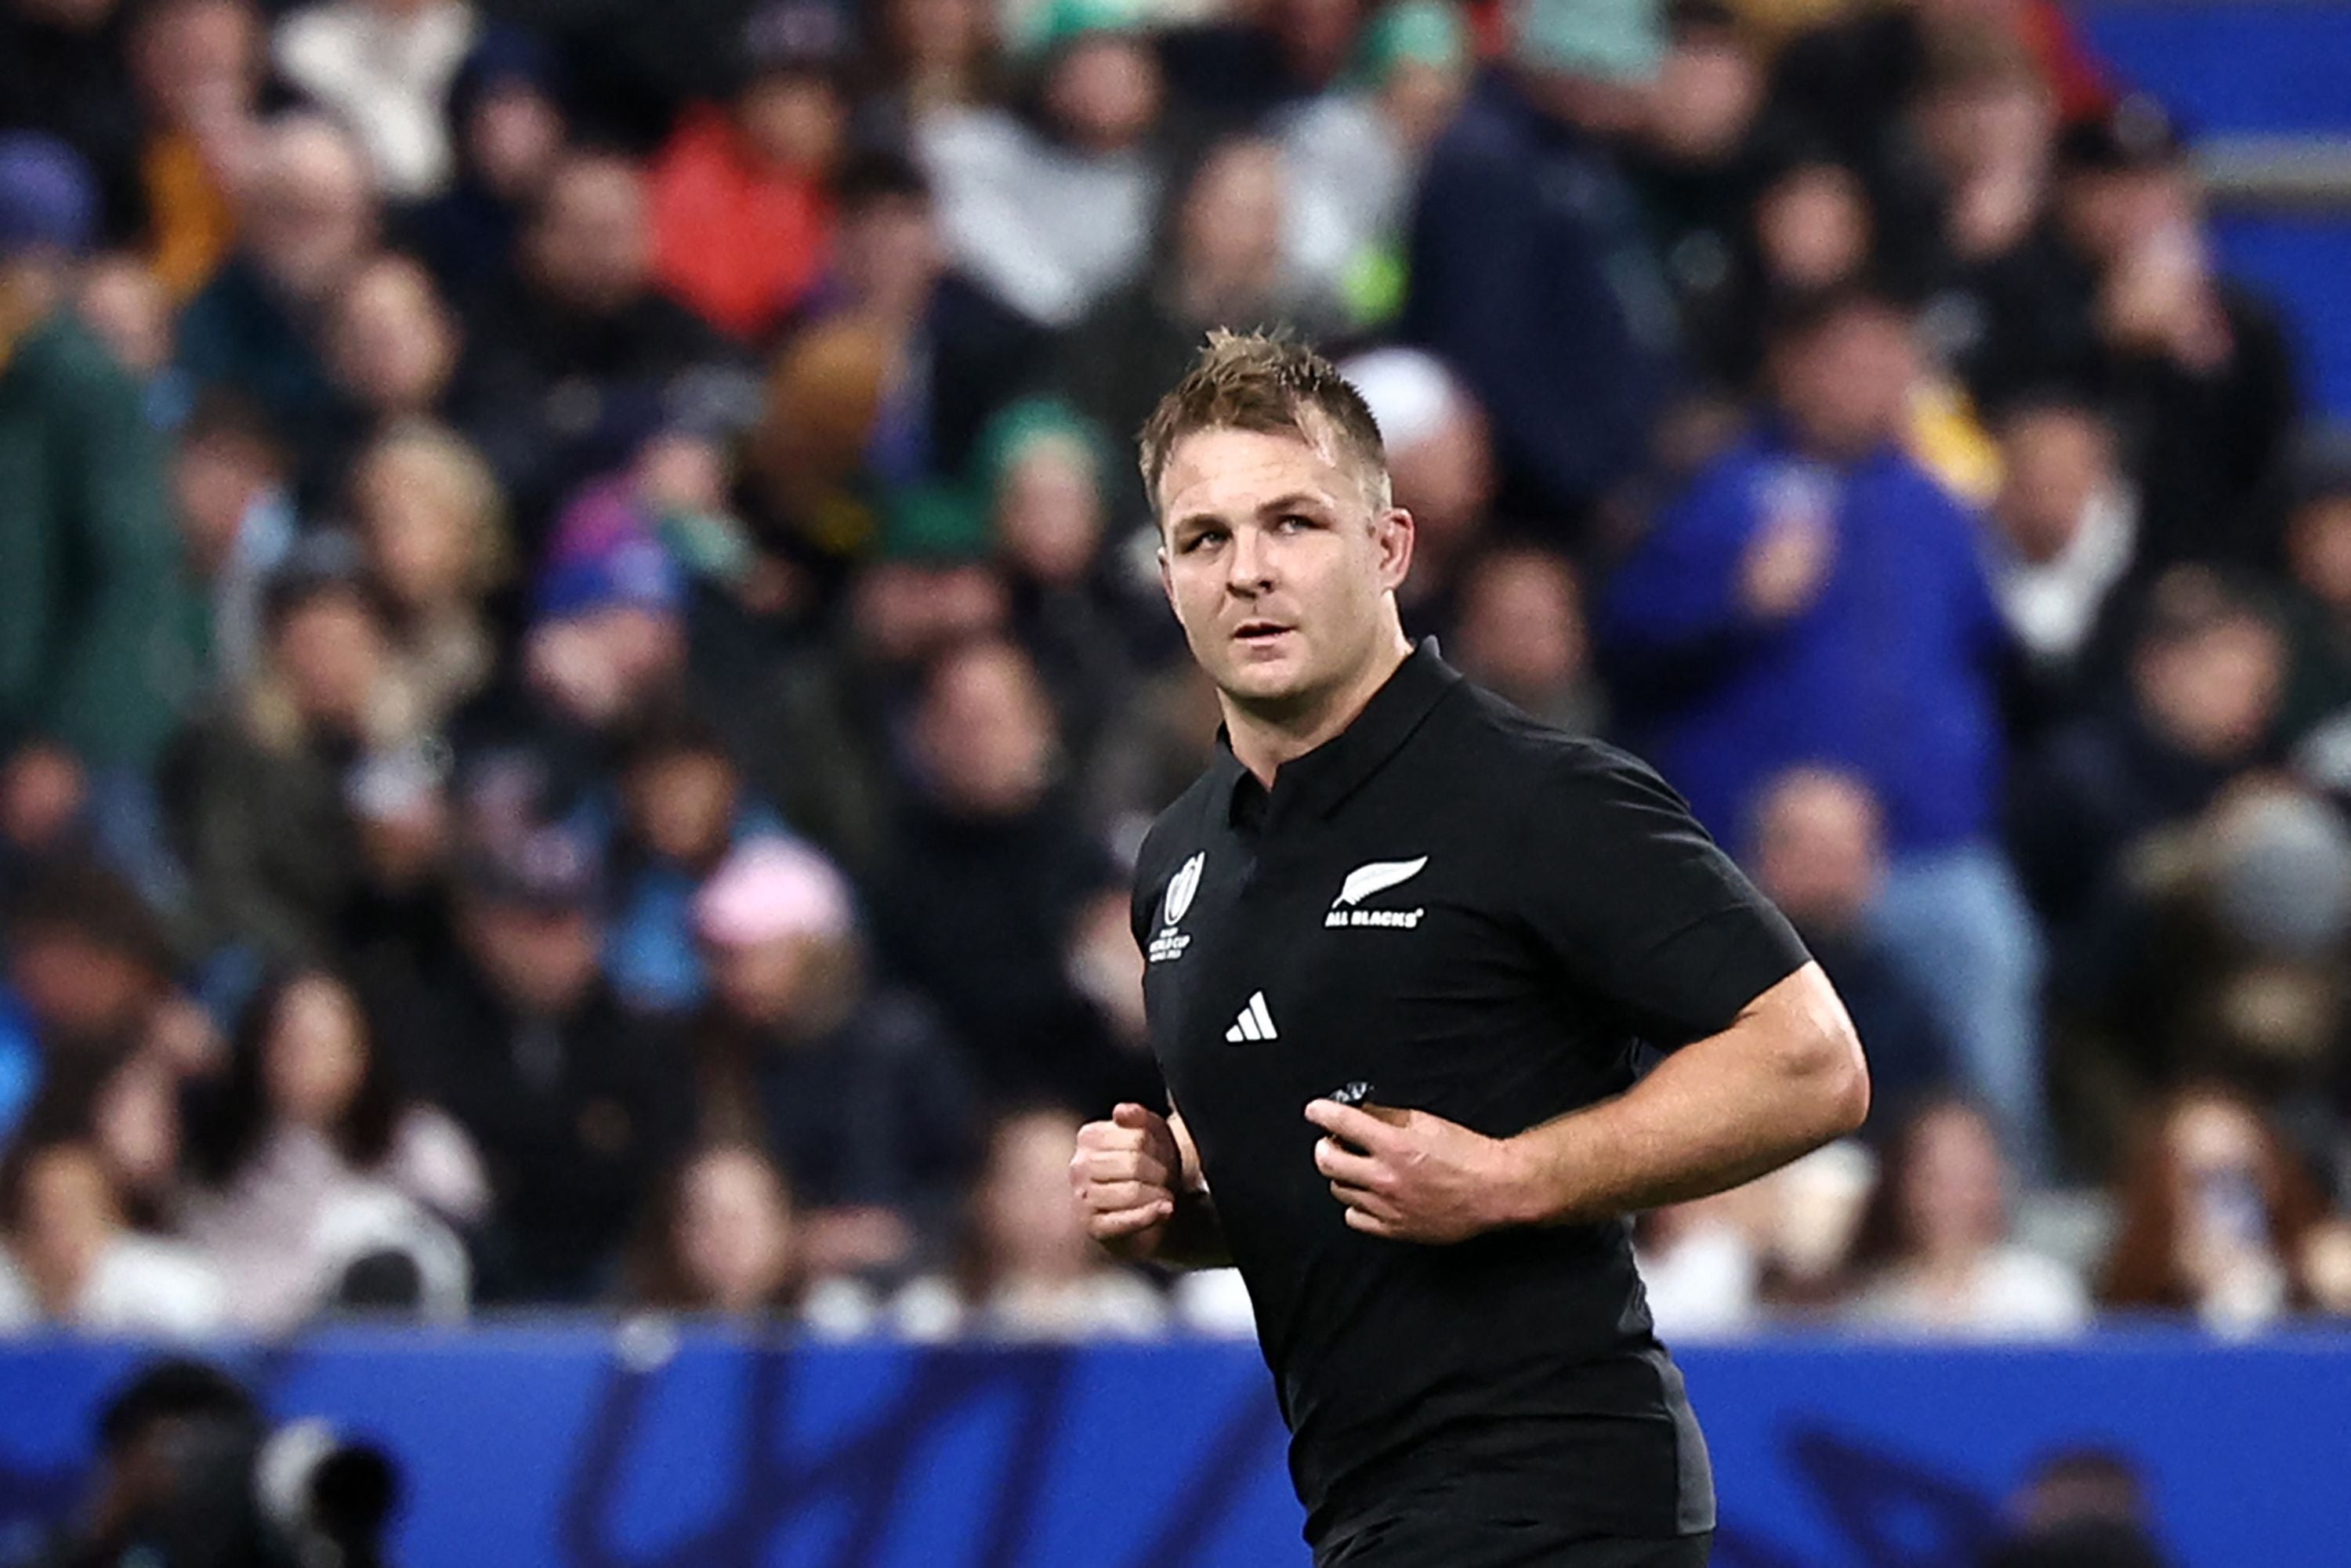 Sam Cane was the first male player to be sent off in a Rugby World Cup final